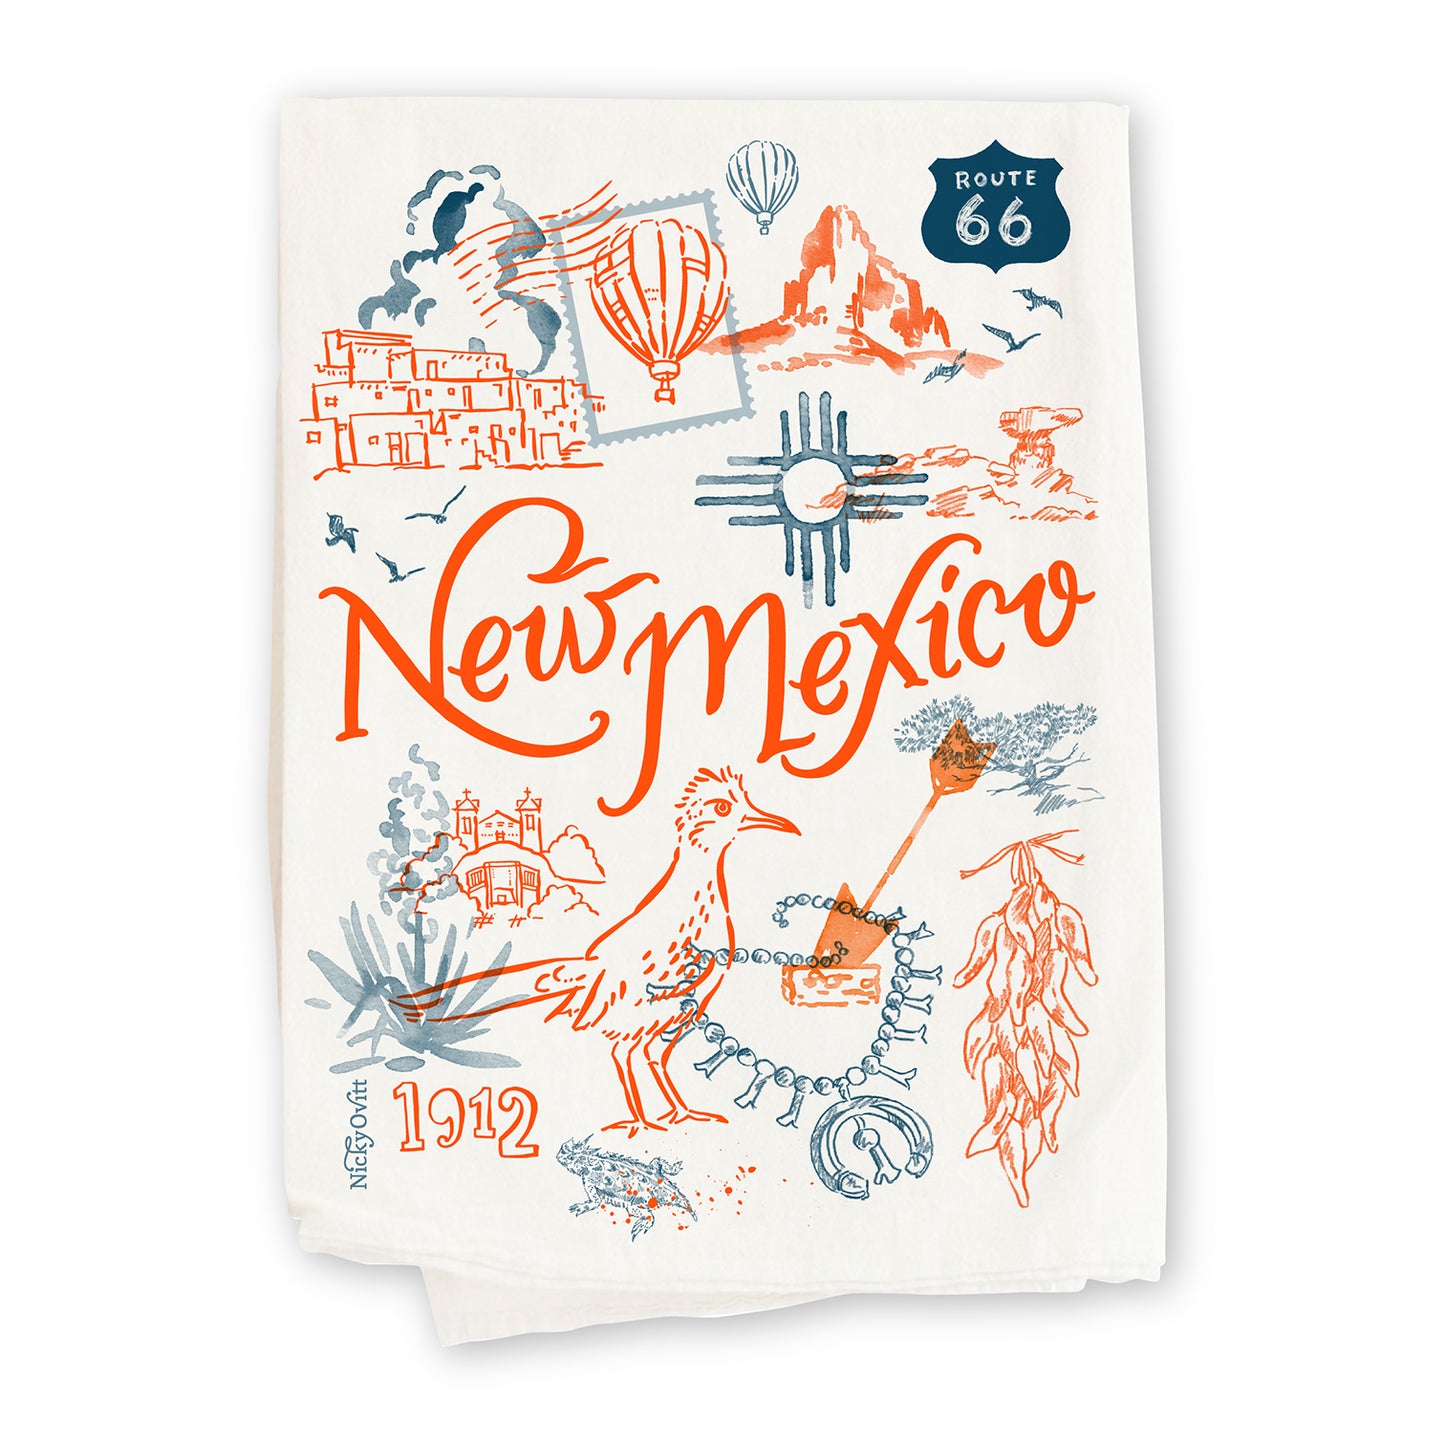 New Mexico Kitchen Towel 3-Pack *PLUS* 2 FREE New Mexico Towels